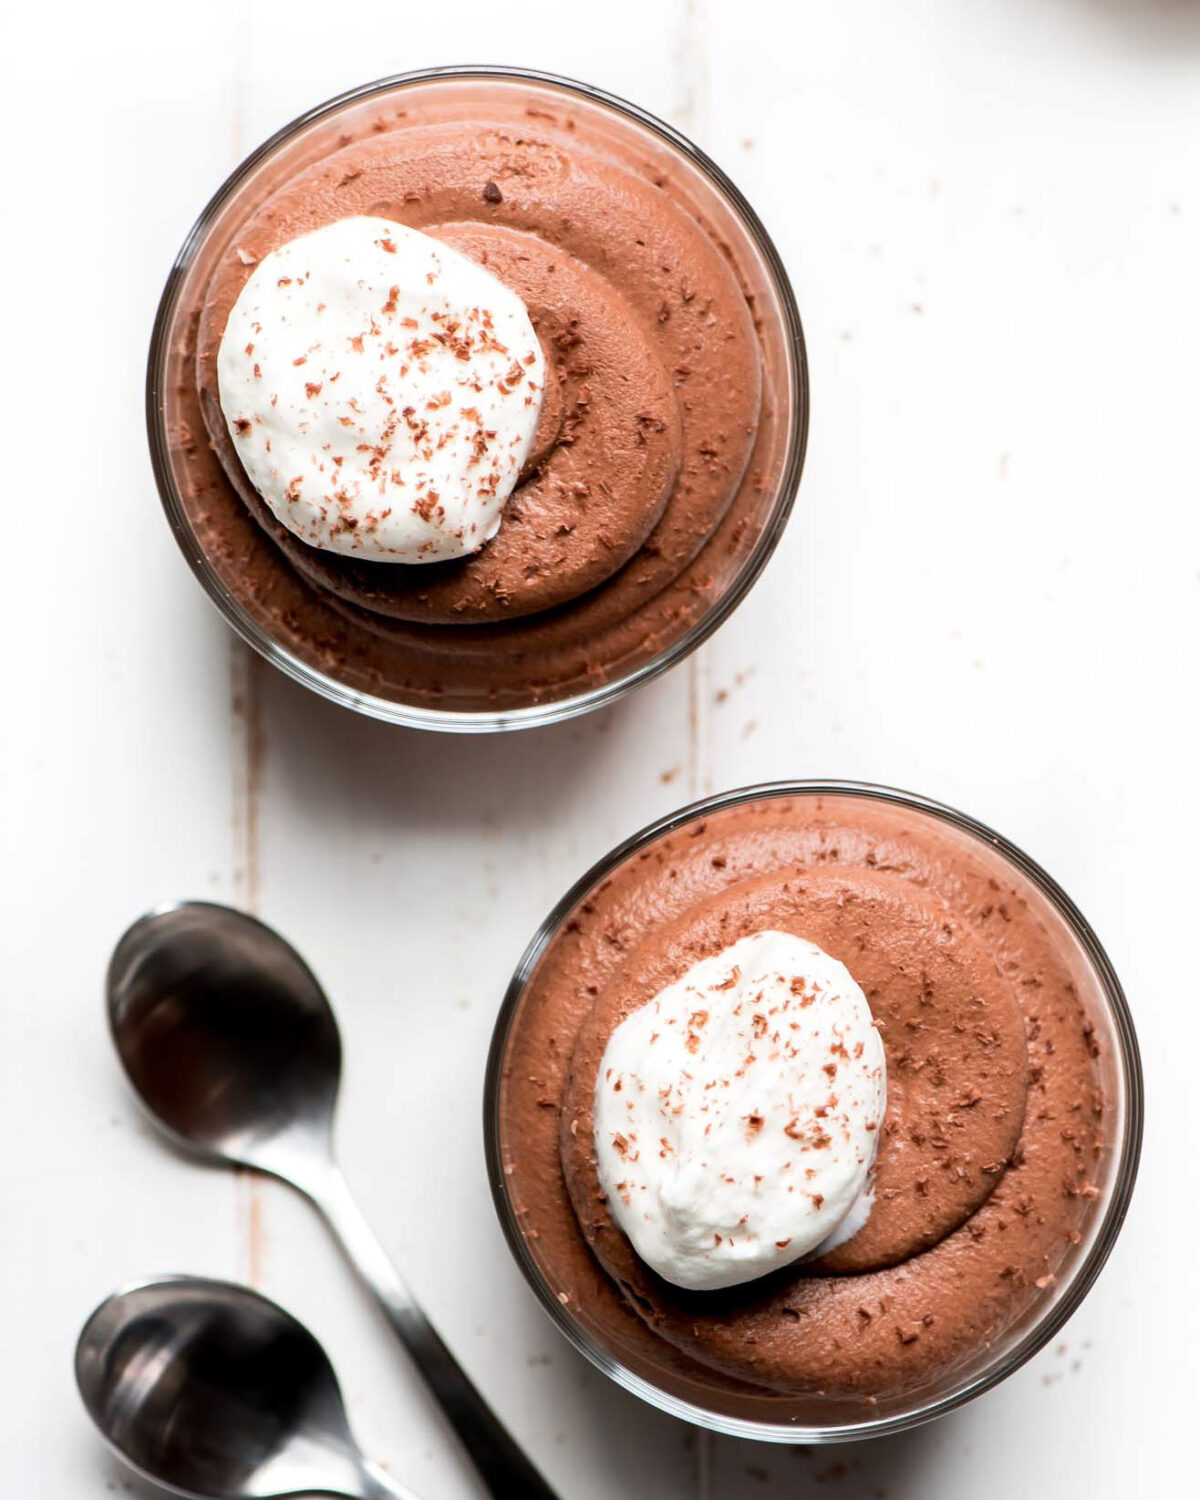 Easy chocolate mousse recipe shown in 2 glass cups topped with whipped cream.